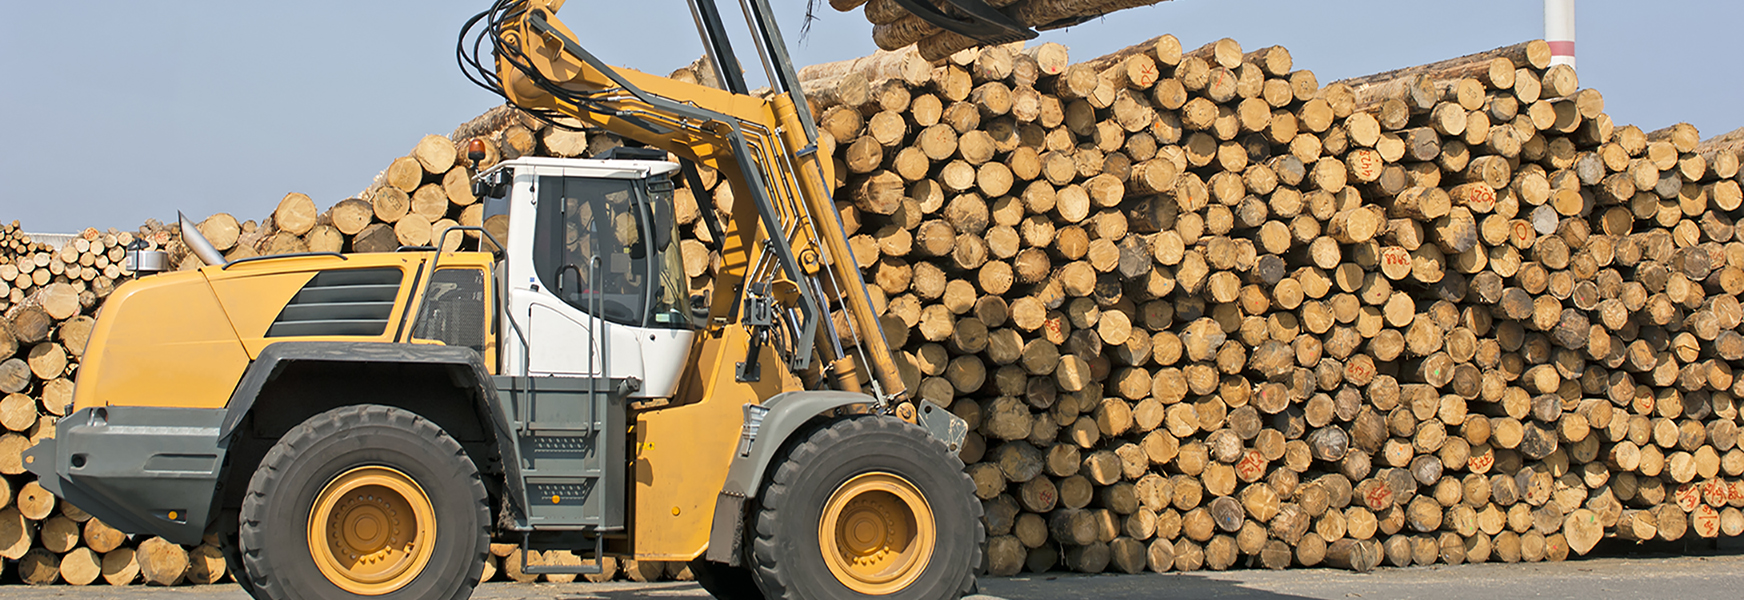 Logging machine in front of log pile